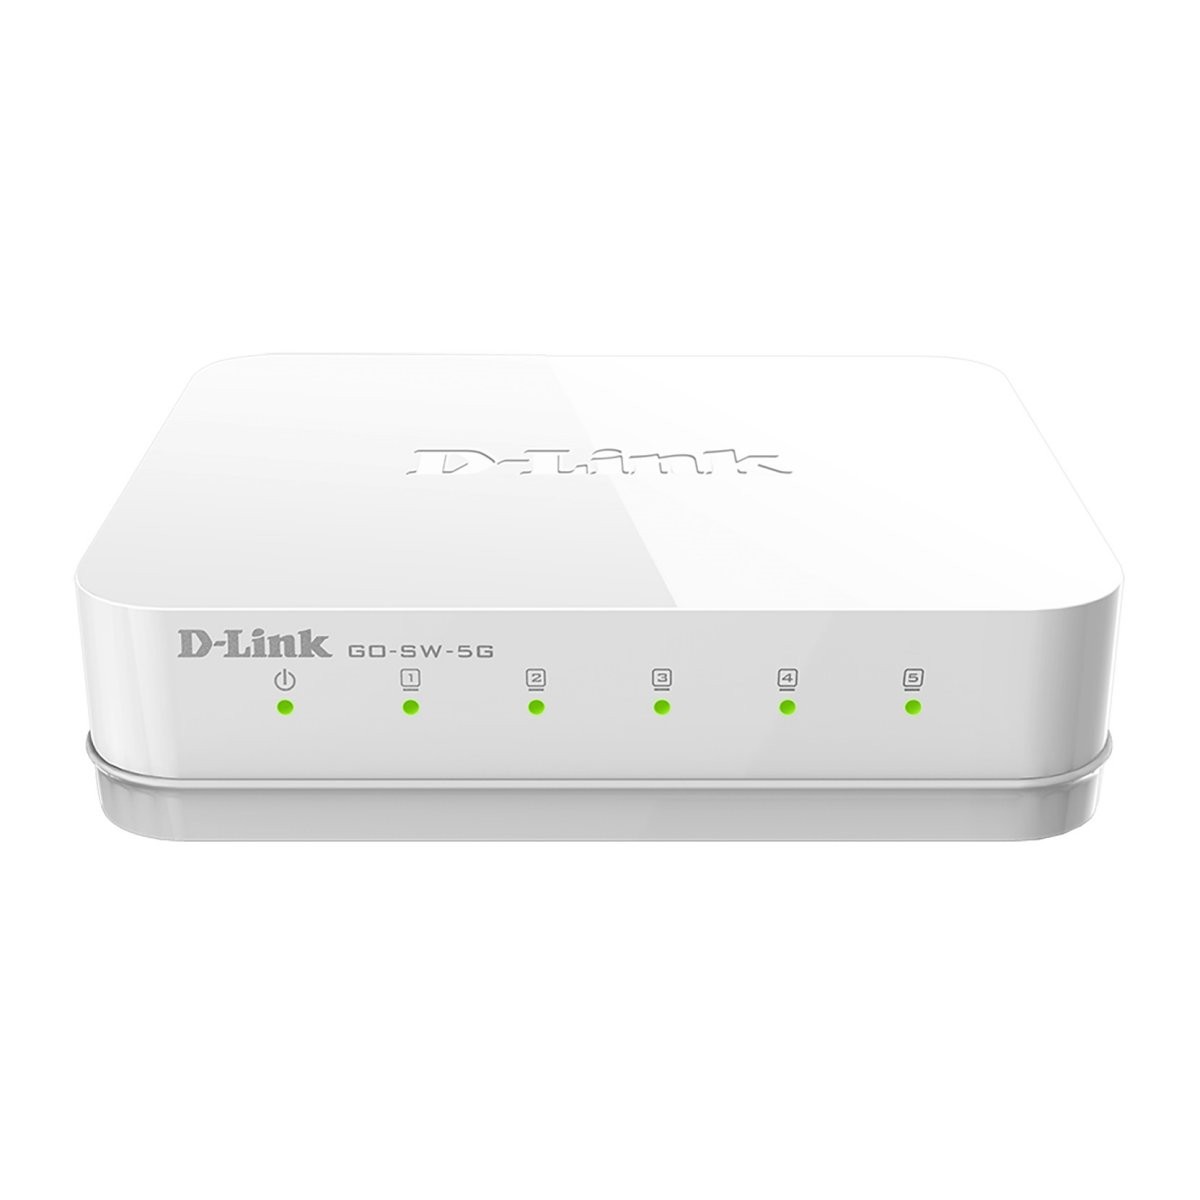 D-LINK GO Network Switch RJ45 5 ports